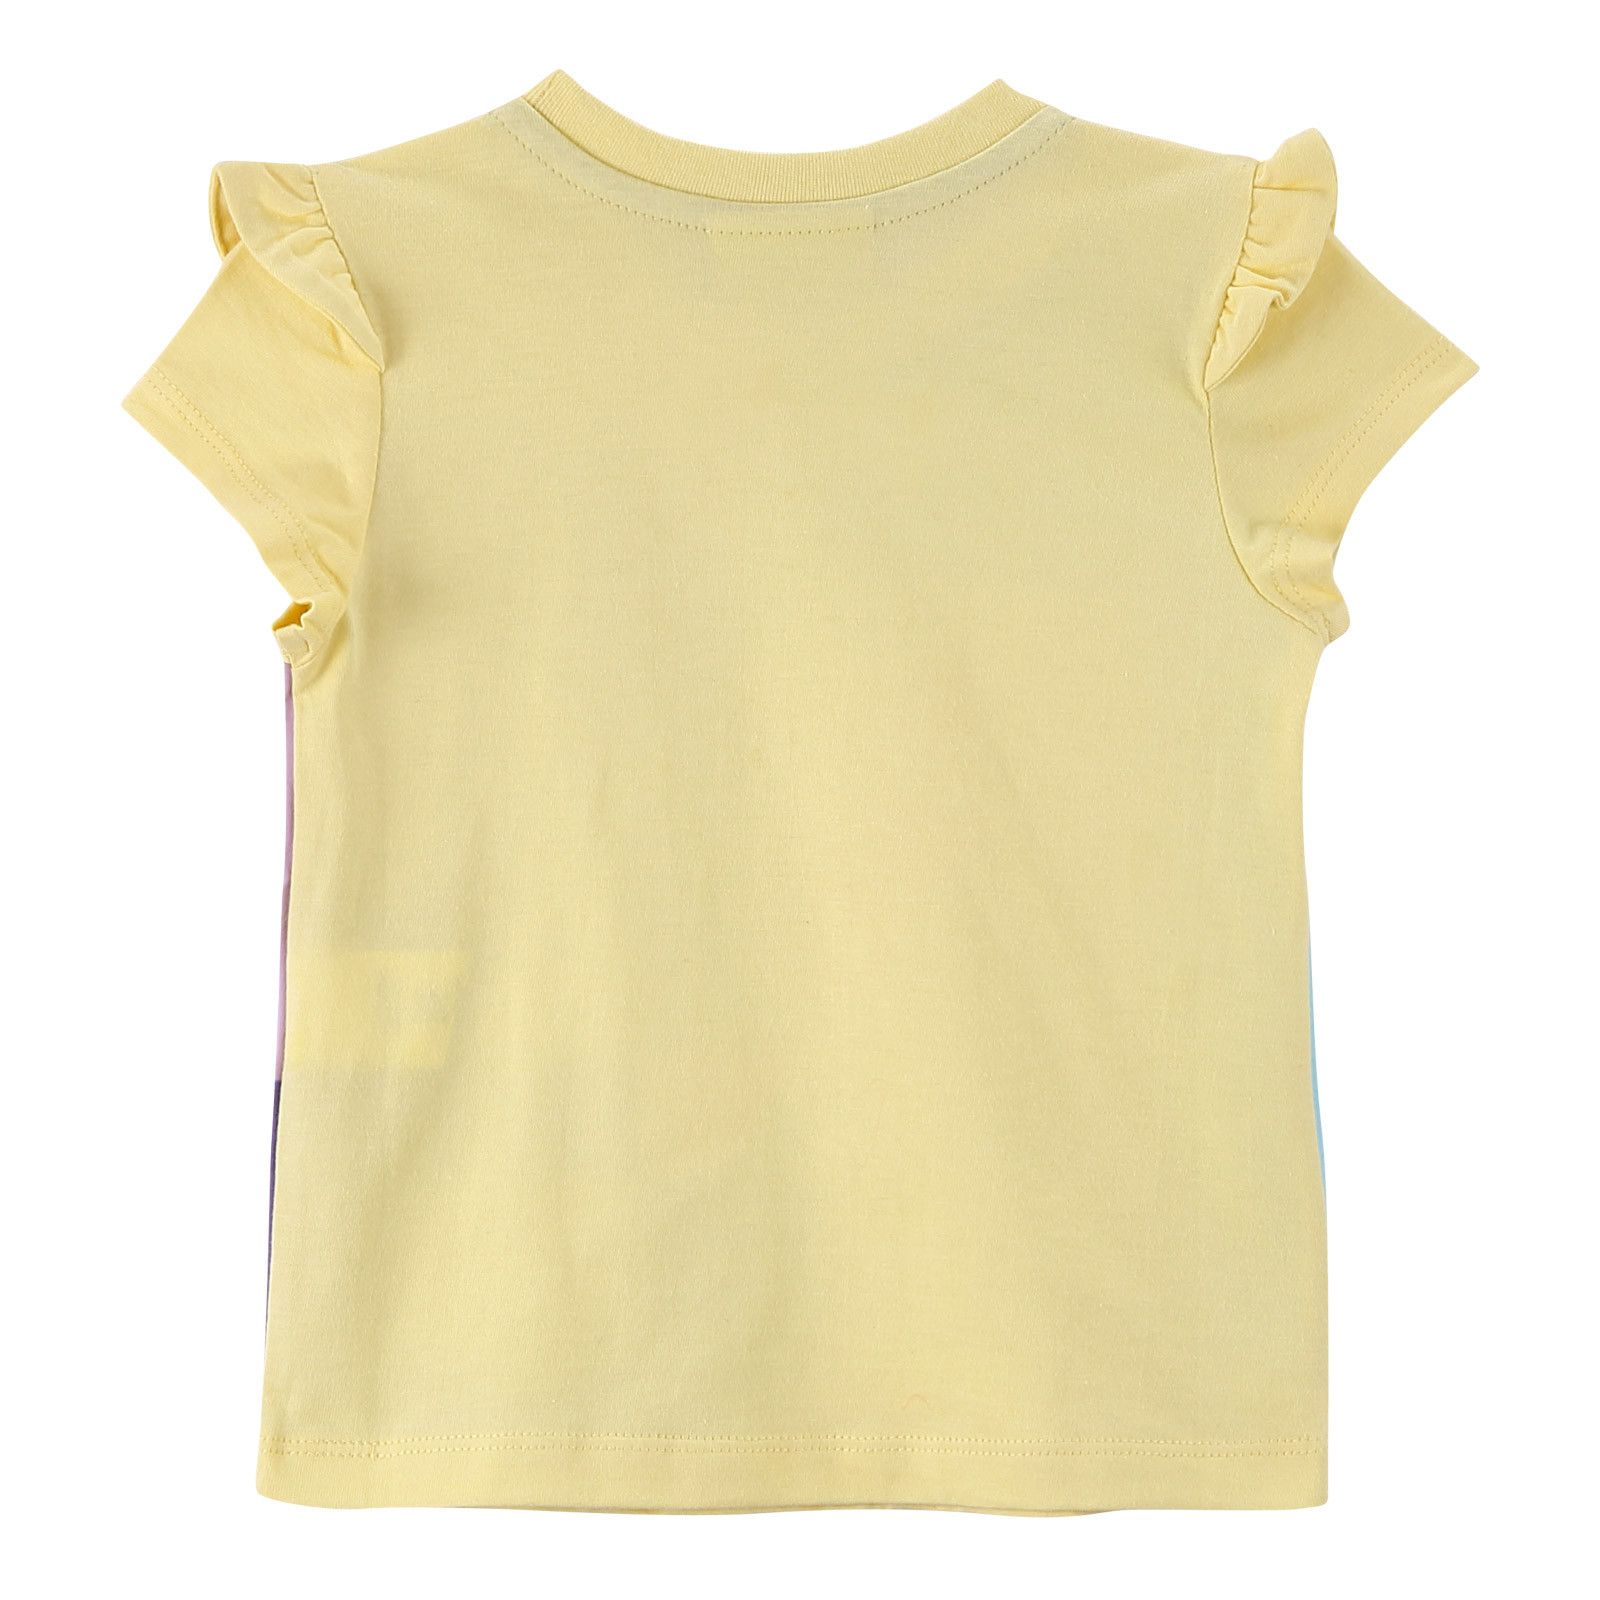 Girls Multicolour Cotton T-Shirt With Yellow Frilly Cuffs - CÉMAROSE | Children's Fashion Store - 3